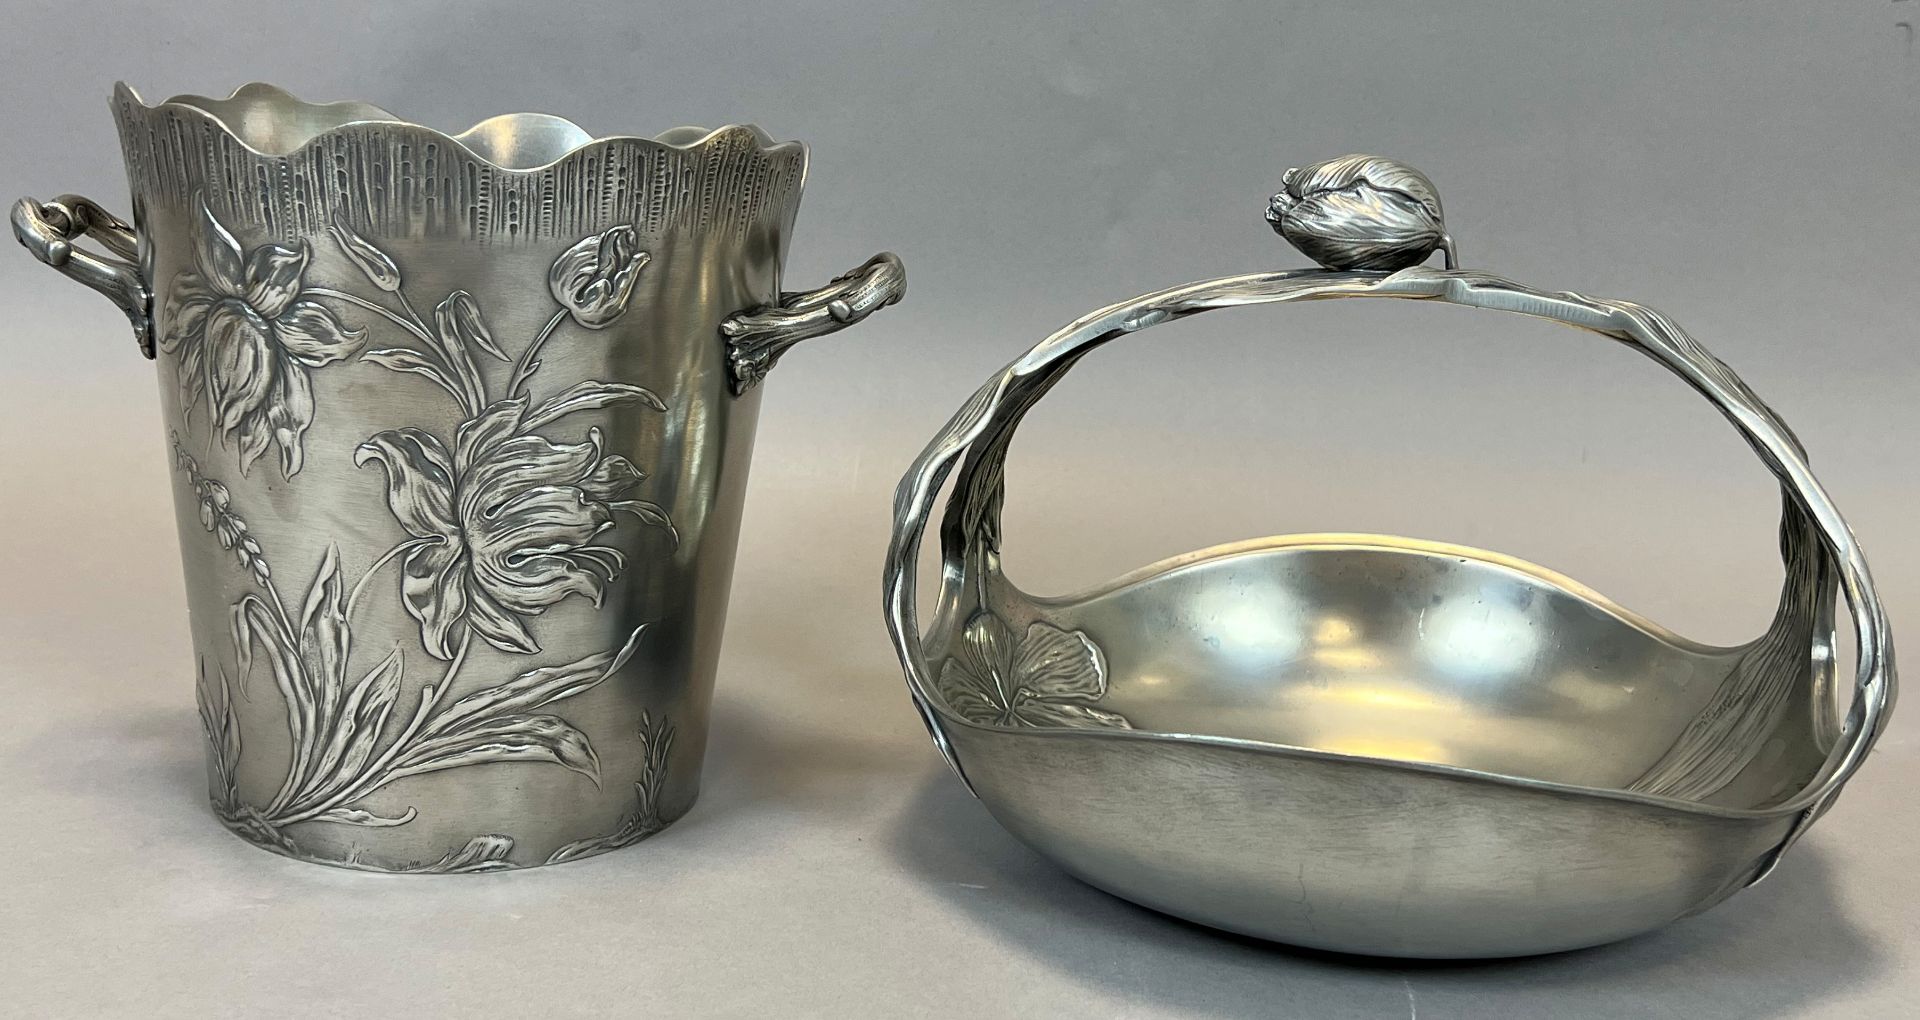 Achille GAMBA (1881 - 1944). Handle bowl and champagne cooler. Art Nouveau. Pewter. - Image 3 of 7